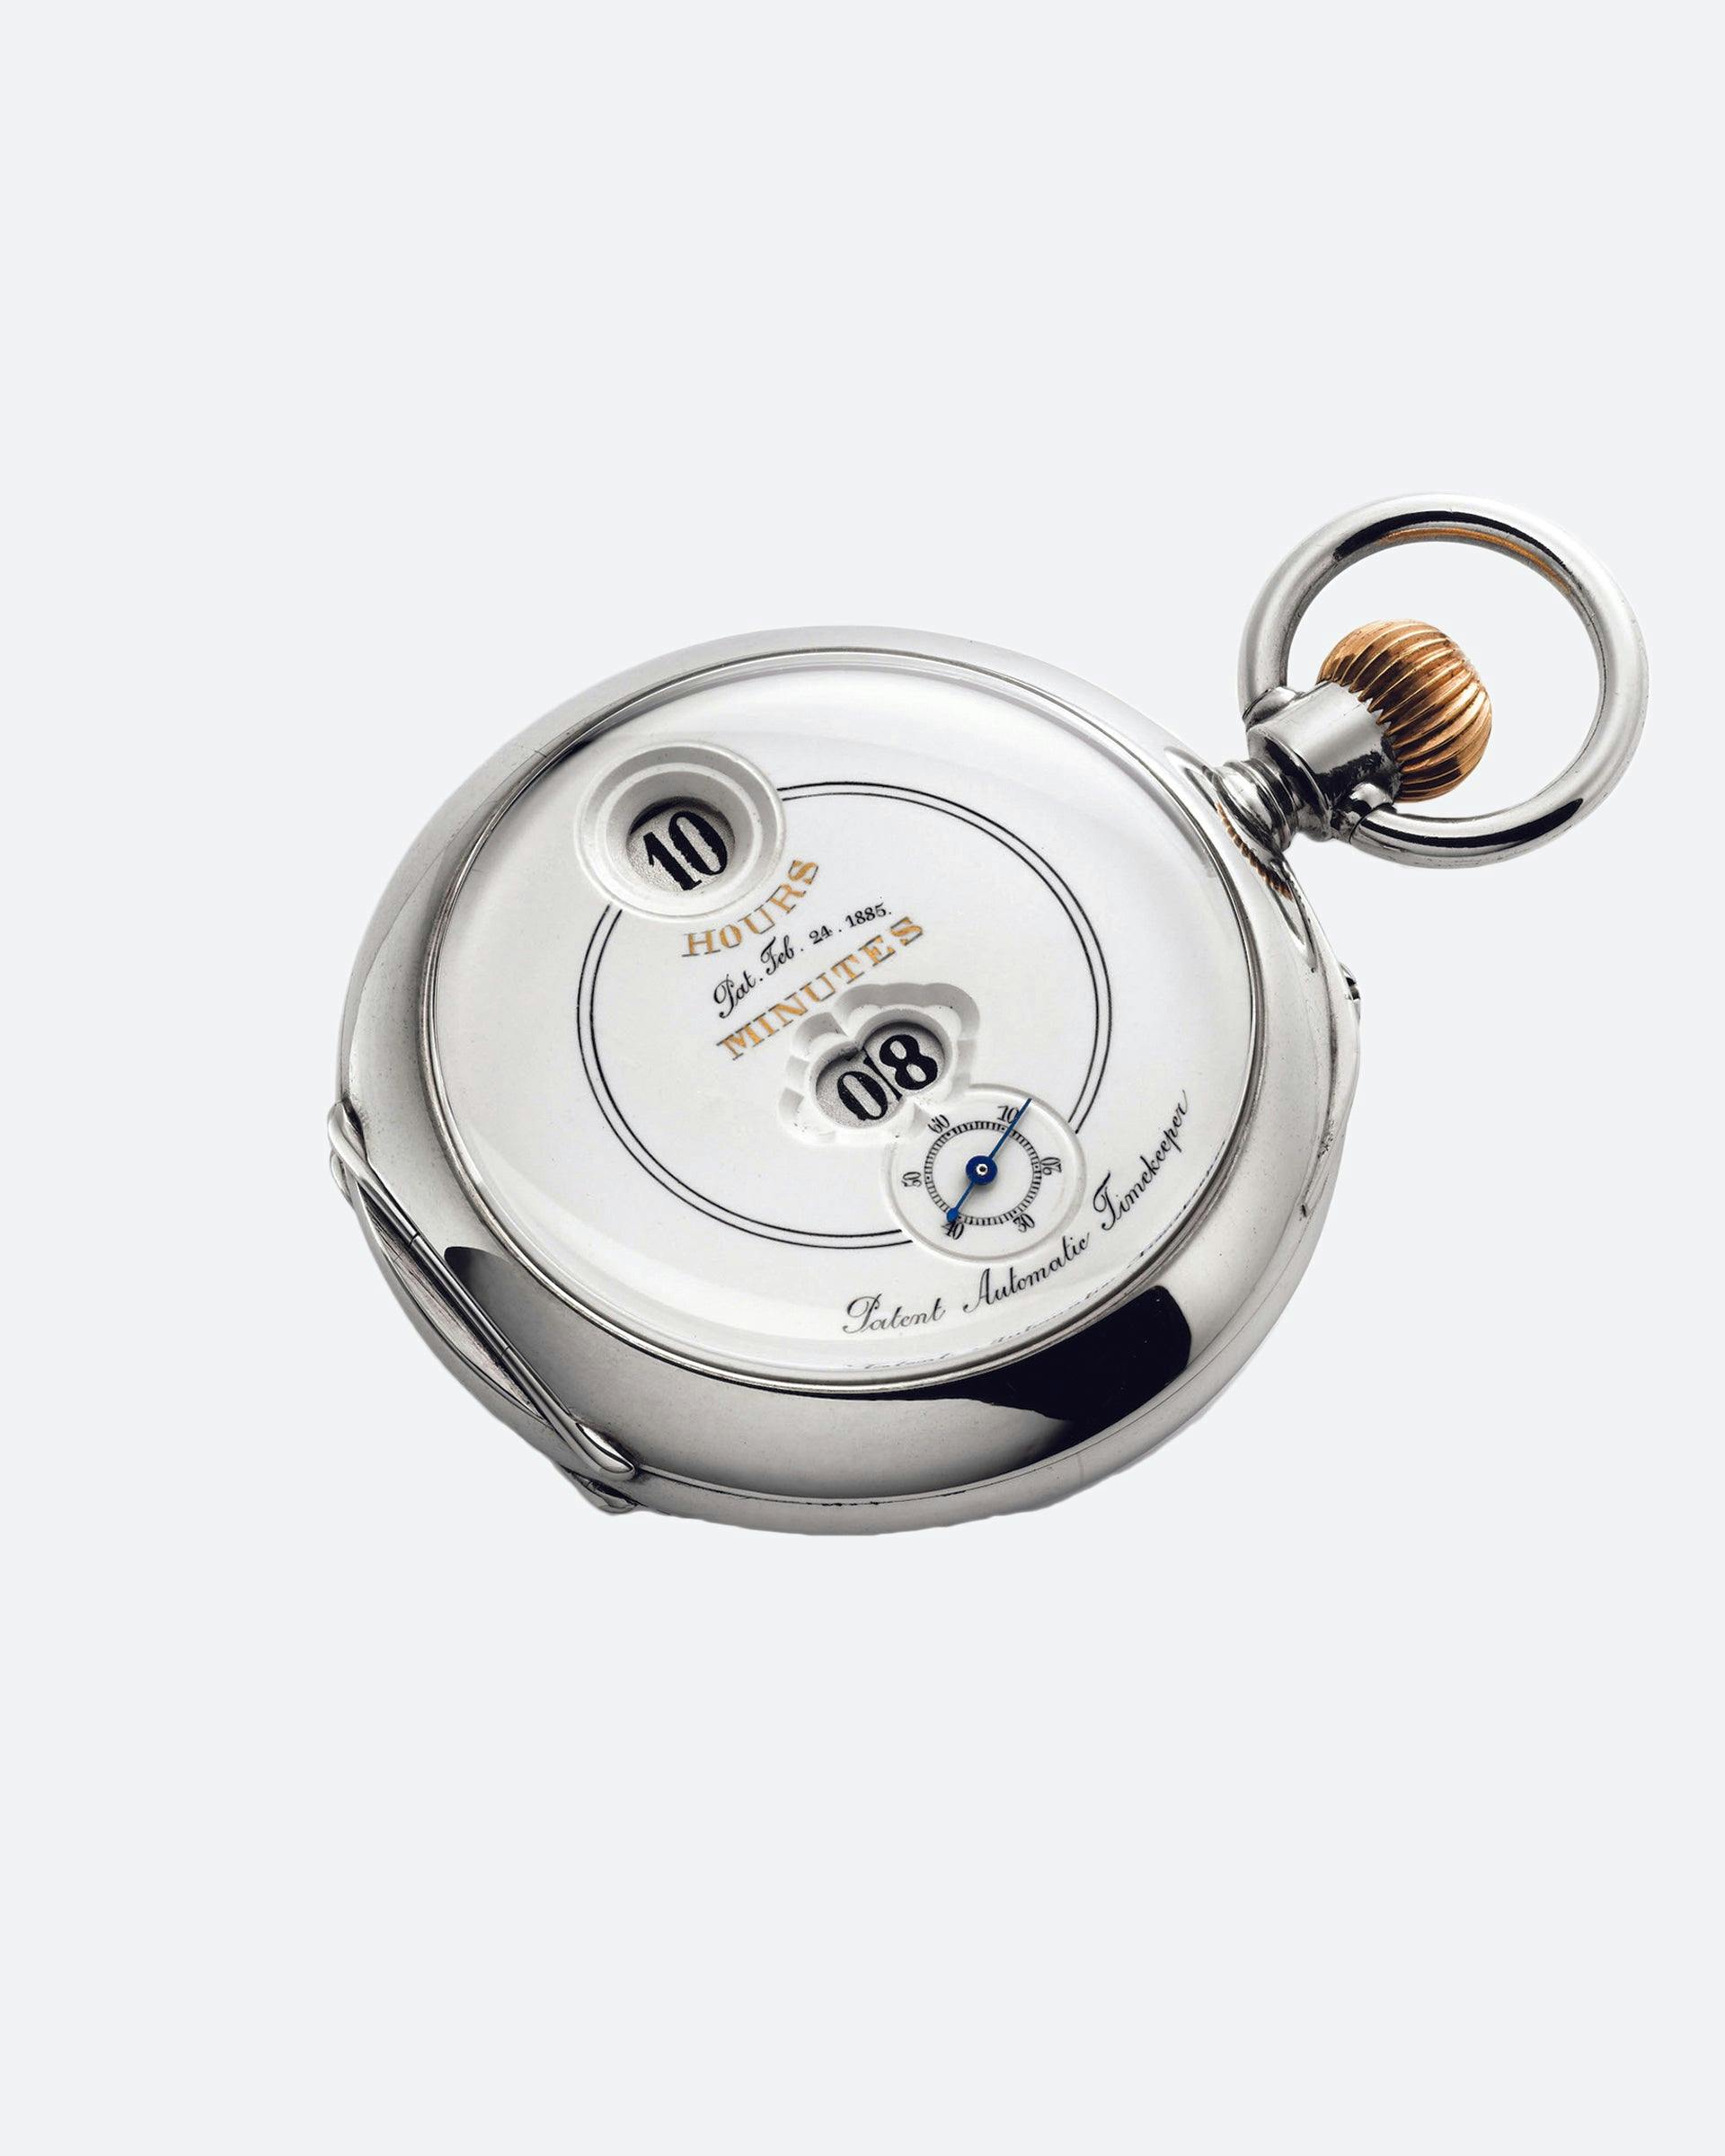 An Original IWC Pocket Watch designed by Josef Pallweber in the 1880s, with jump hour and minutes.